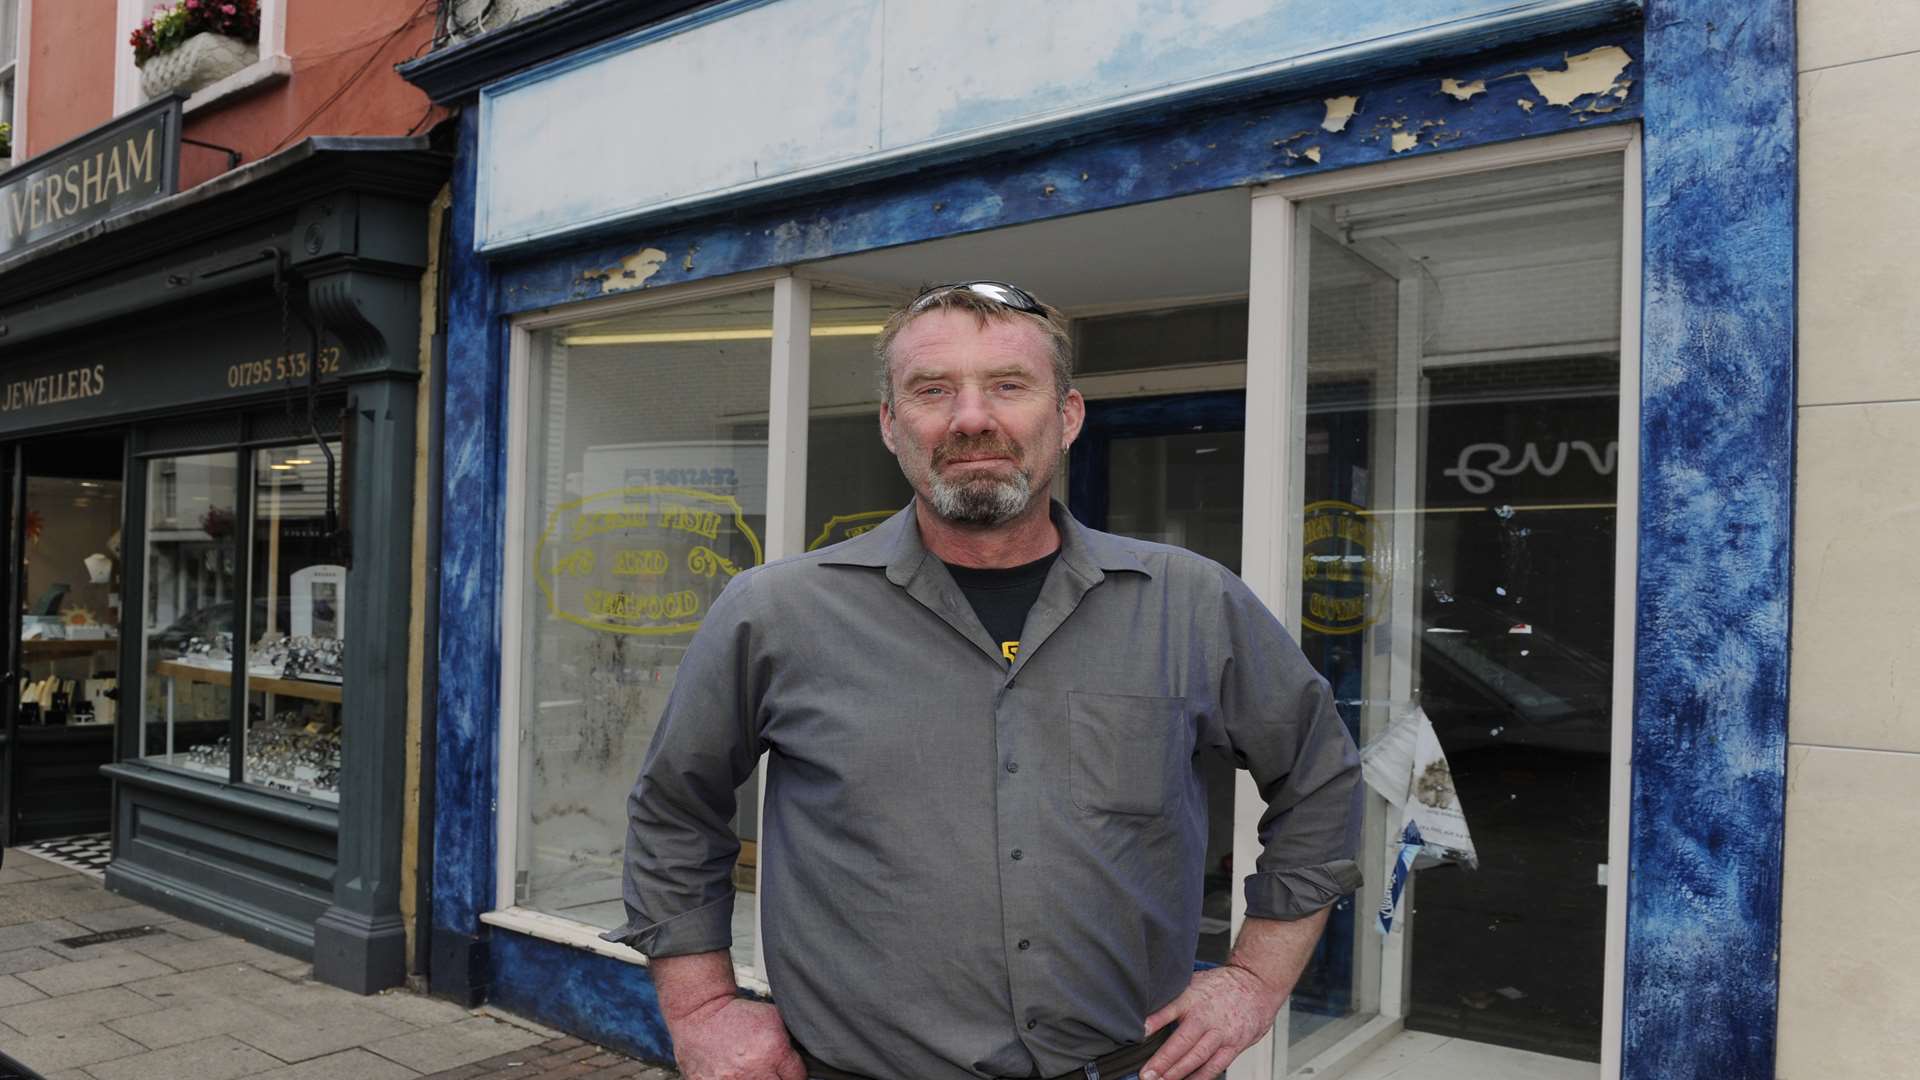 Andrew Sach will open the doors of Faversham's first micro-pub on Thursday.